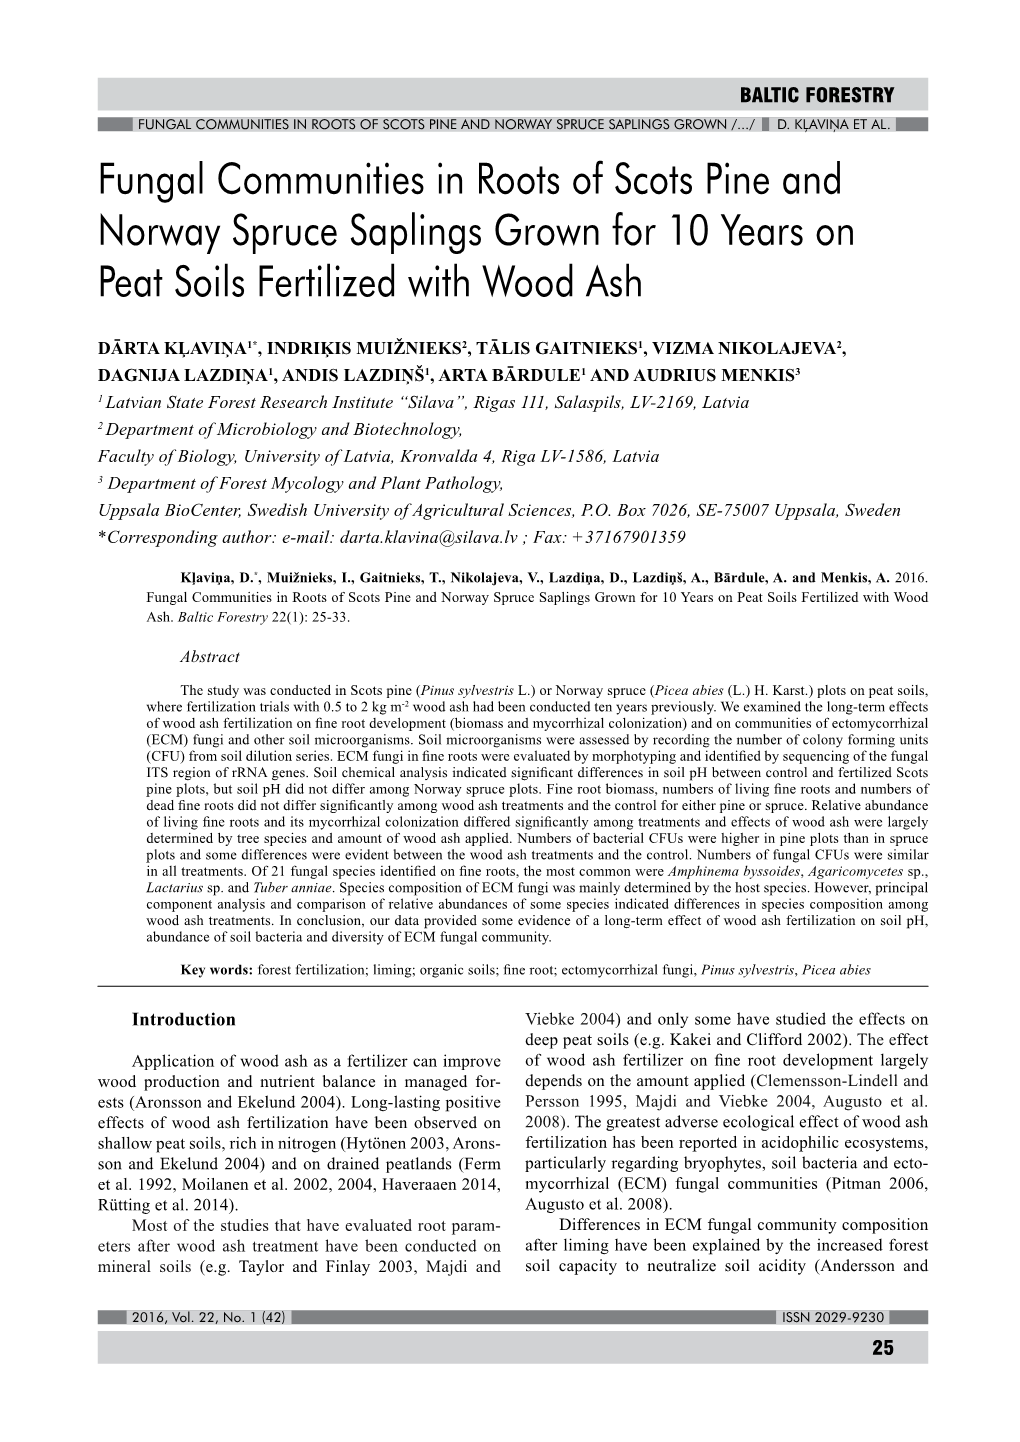 Fungal Communities in Roots of Scots Pine and Norway Spruce Saplings Grown /.../ D